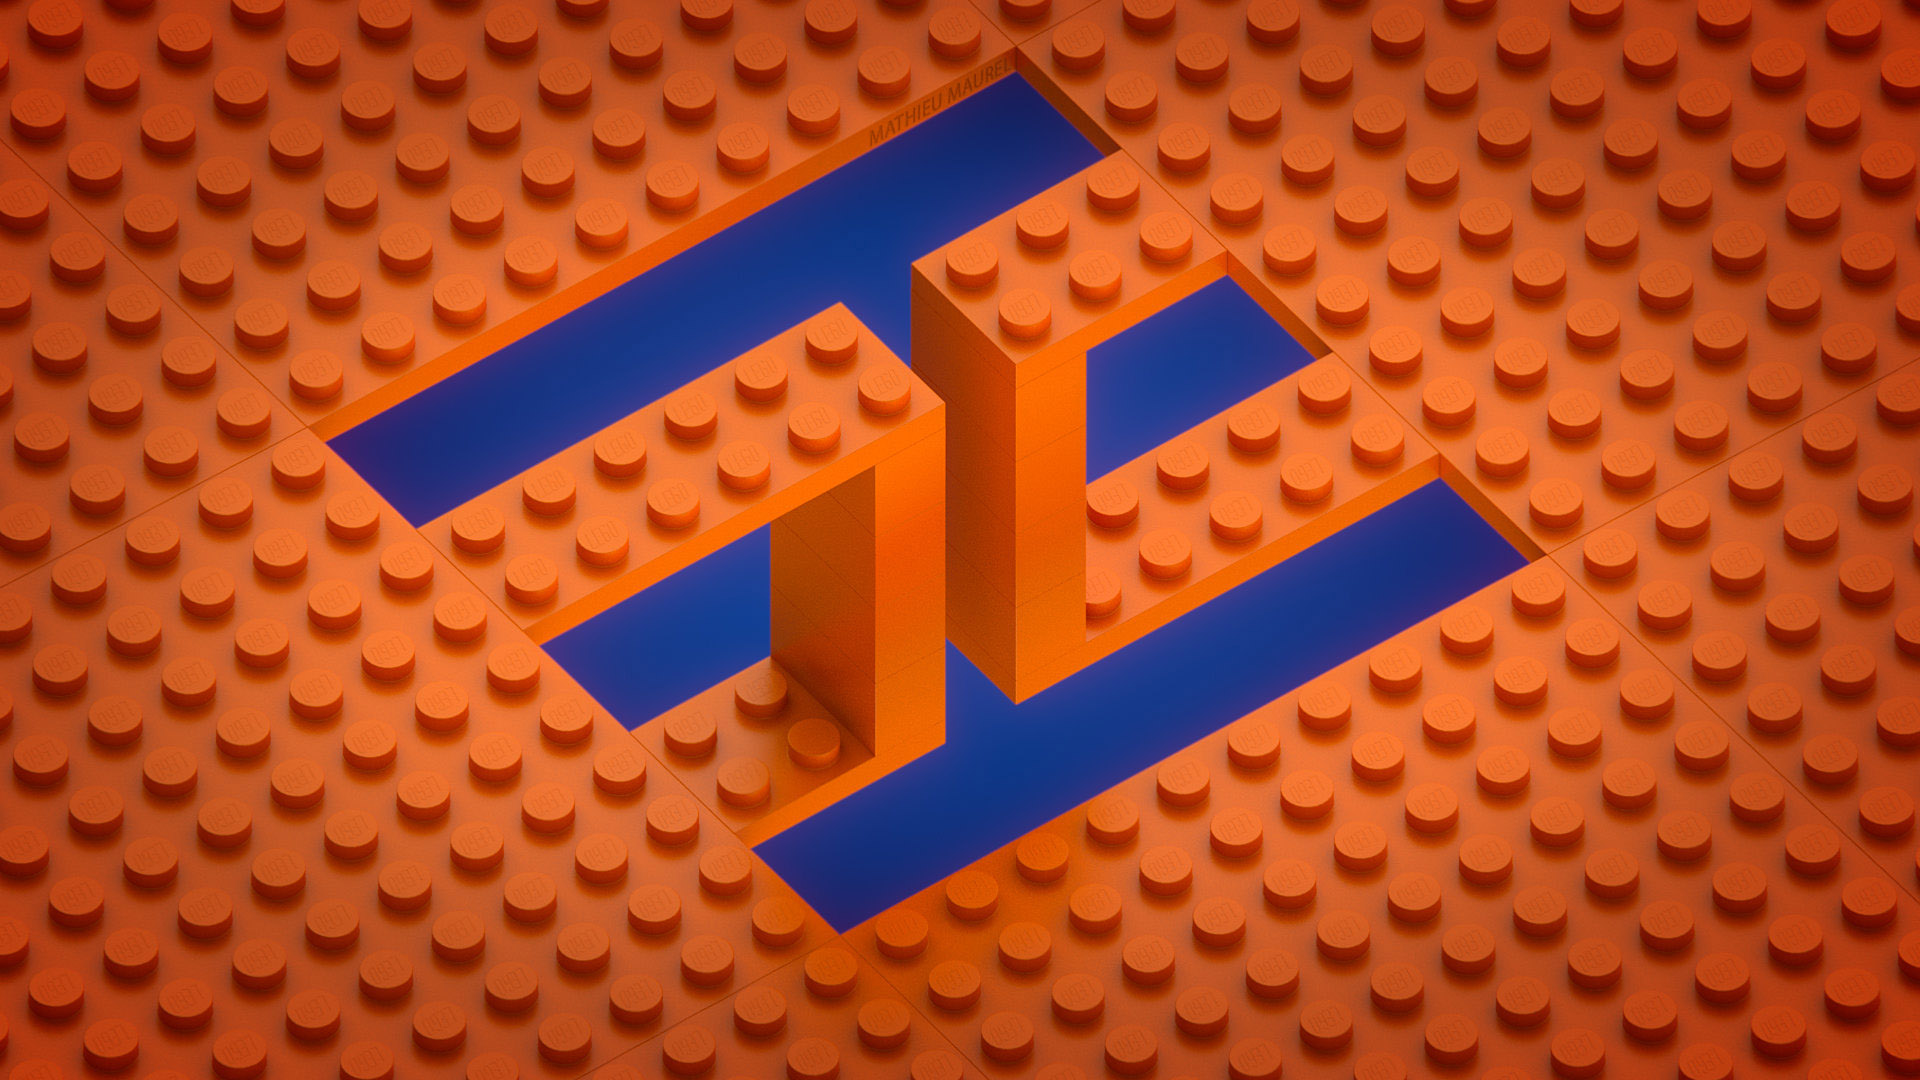 LEGO ABSTRACT